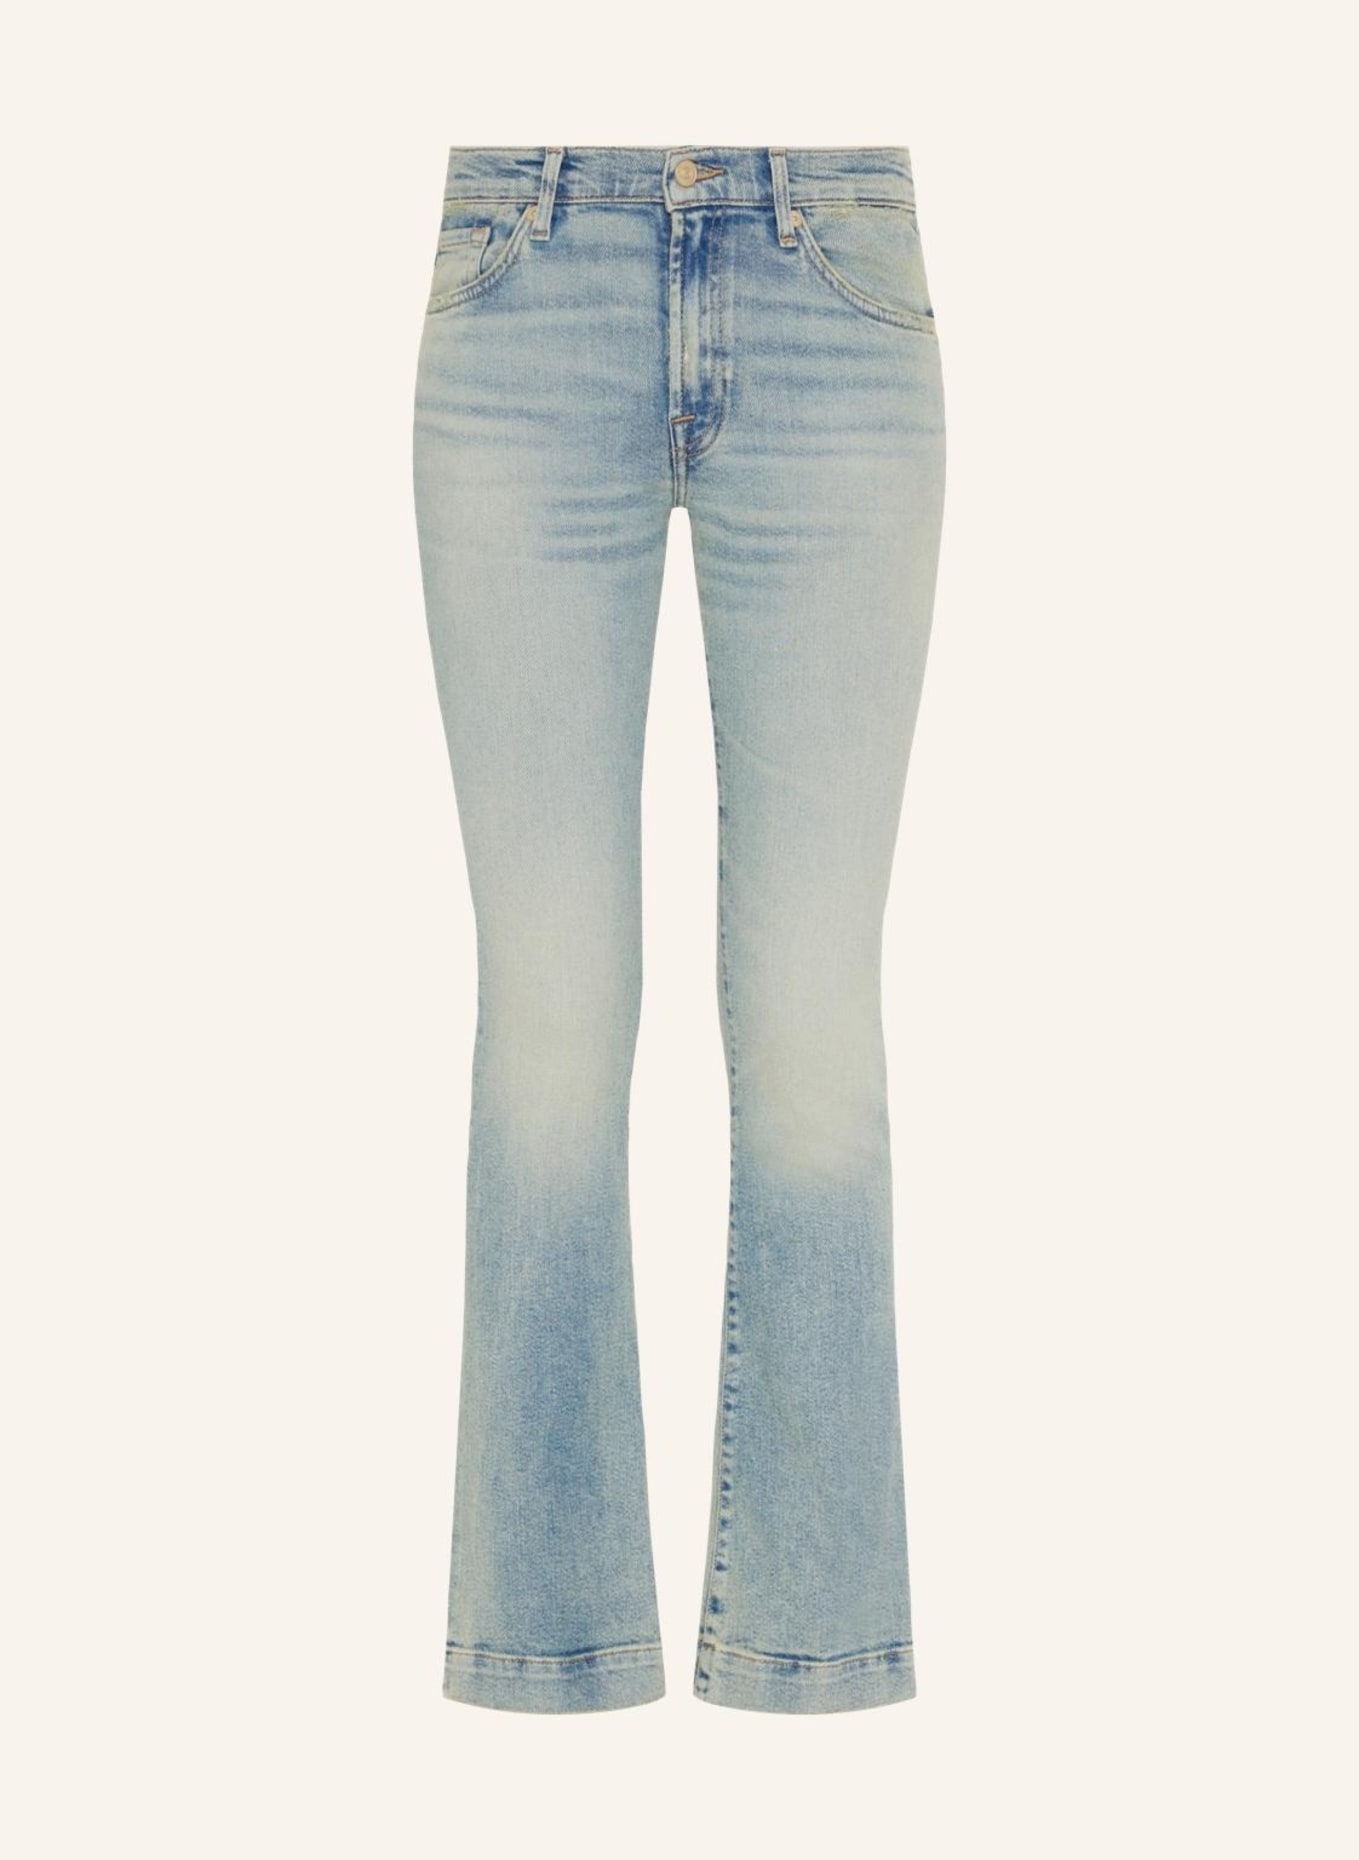 7 for all mankind Jeans BOOTCUT TAILORLESS Bootcut fit, Farbe: BLAU (Bild 1)